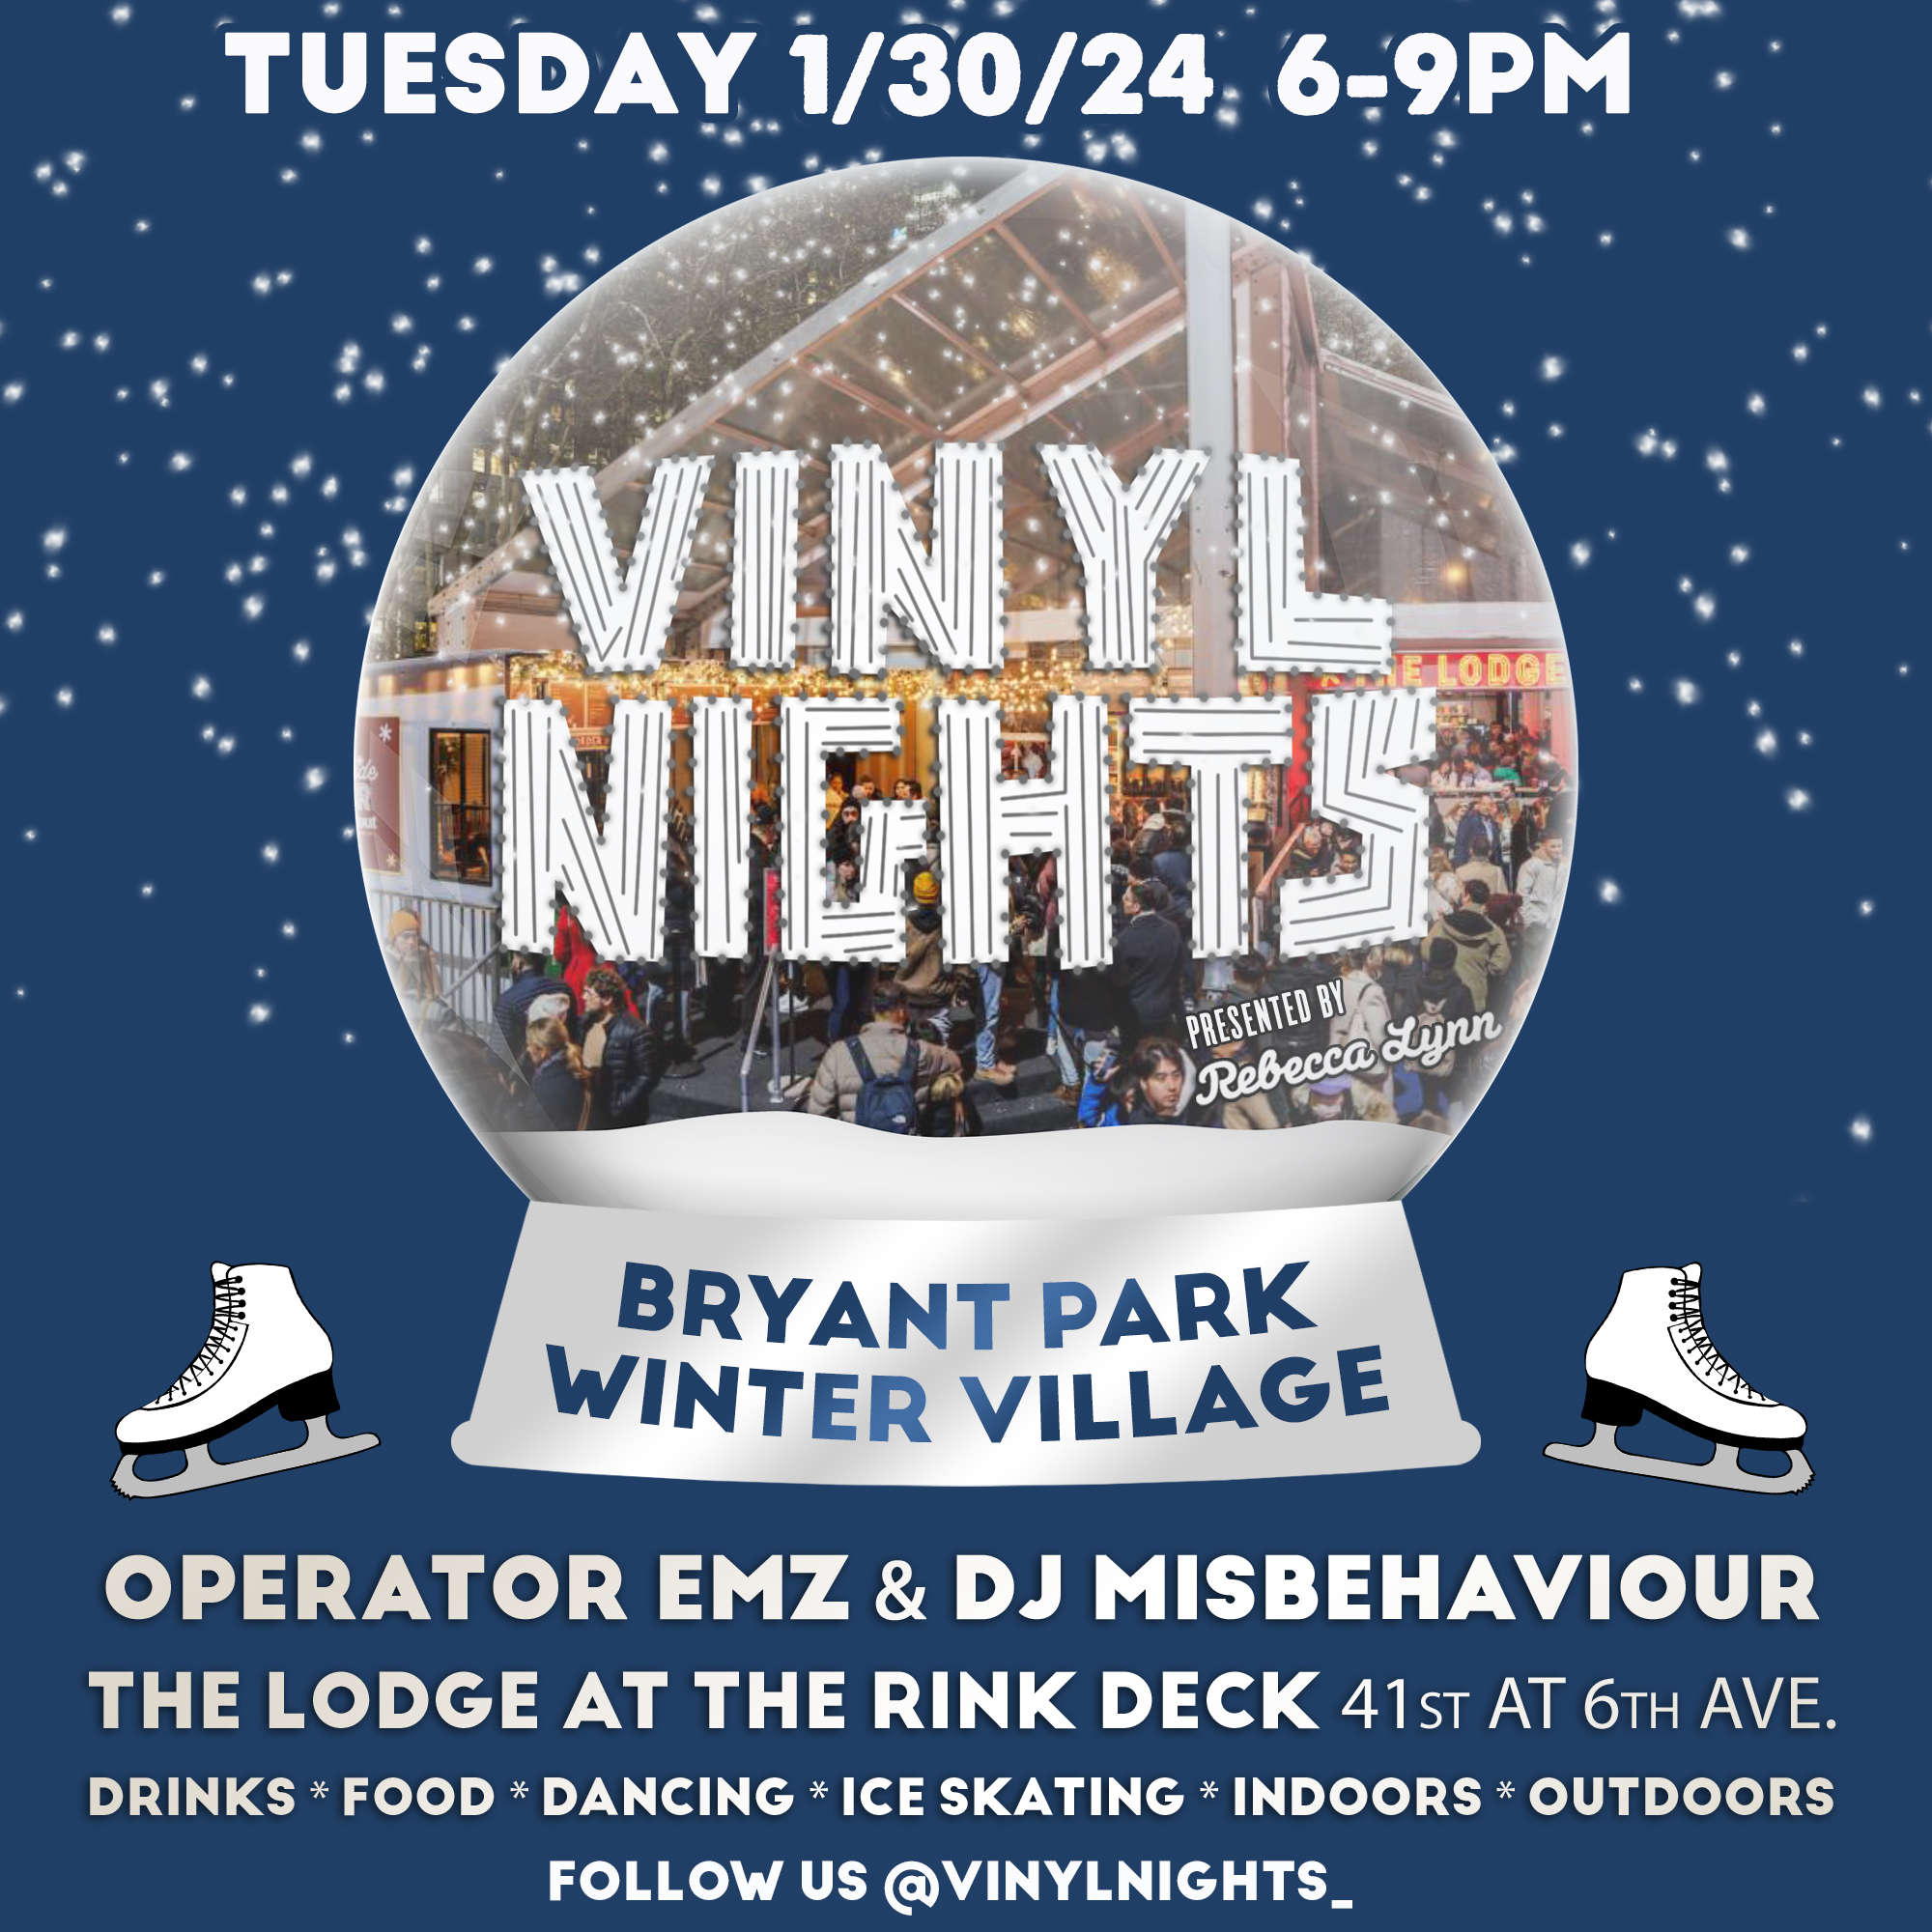 Vinyl Nights Tuesdays at The Lodge at Bryant Park at Bryant Park on Tue